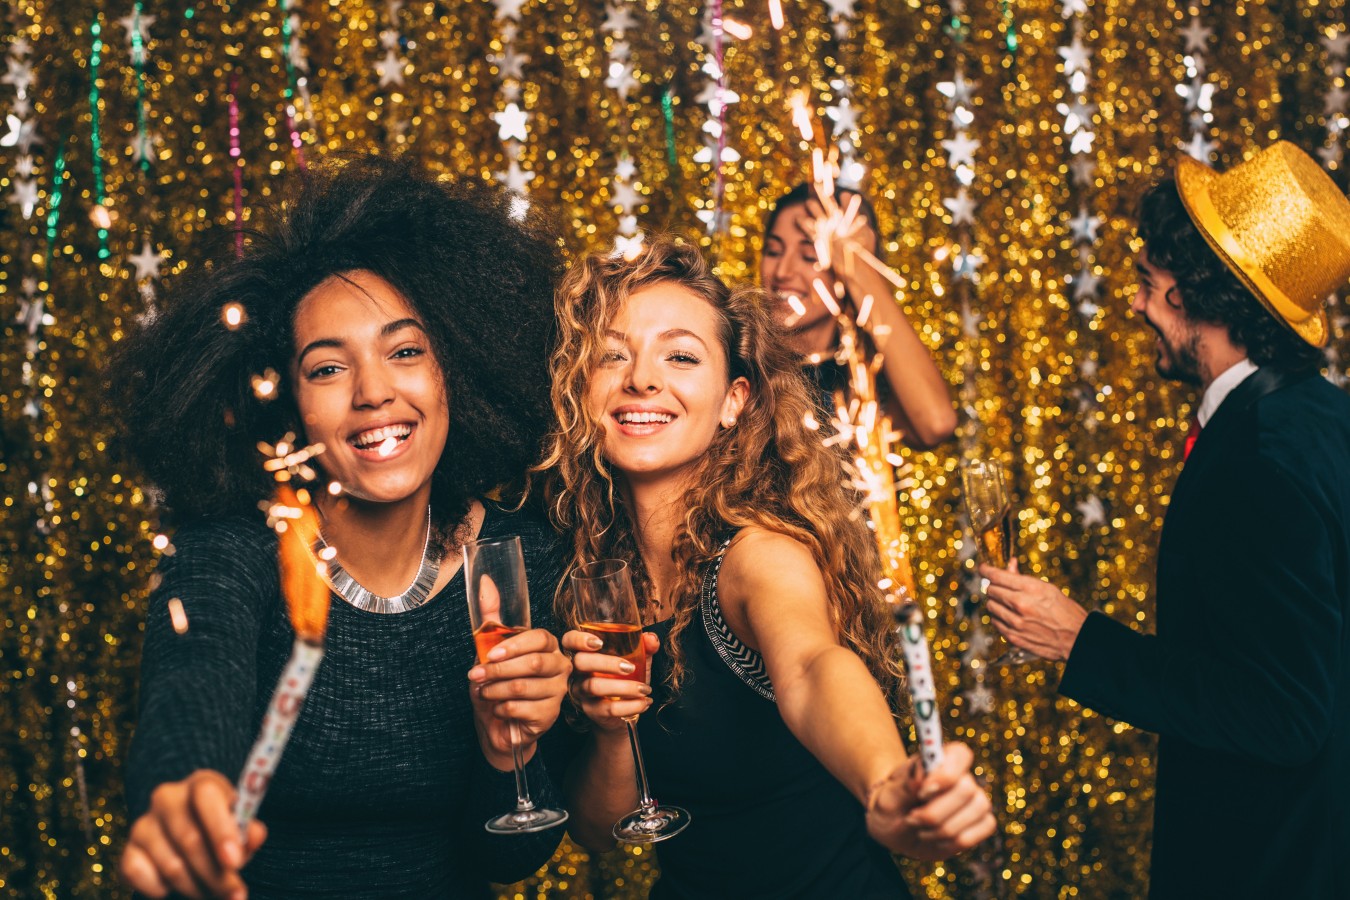 How to Host the Ultimate New Year’s Eve Party Outdoors